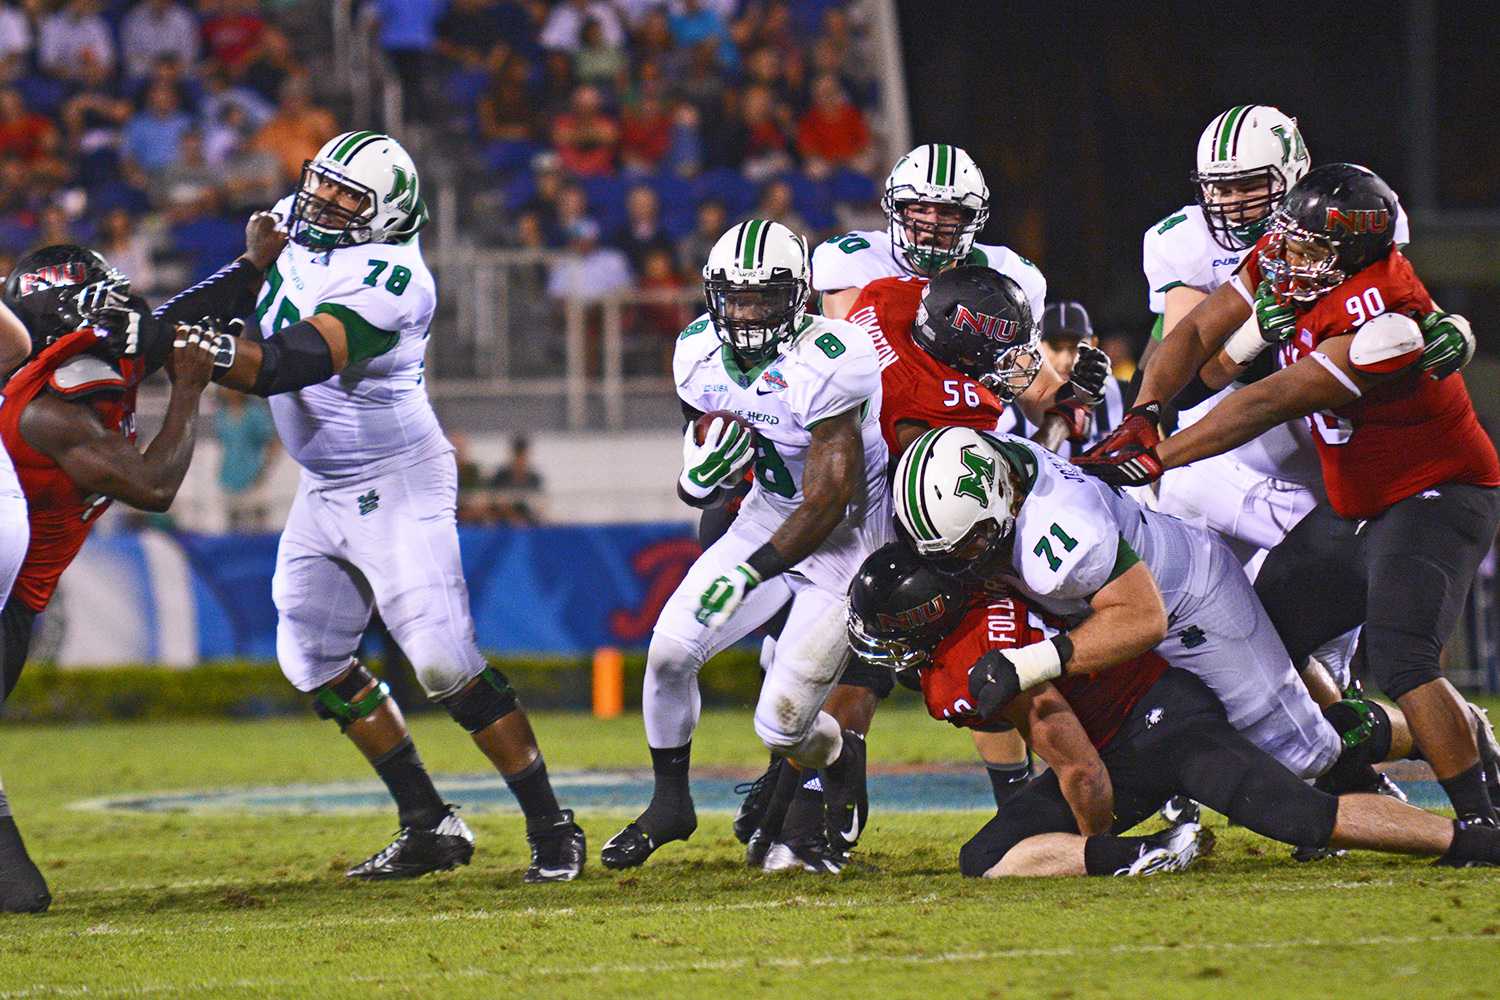 Marshall running back Remi Watson knifes through a gap for what became a 25-yard gain.  